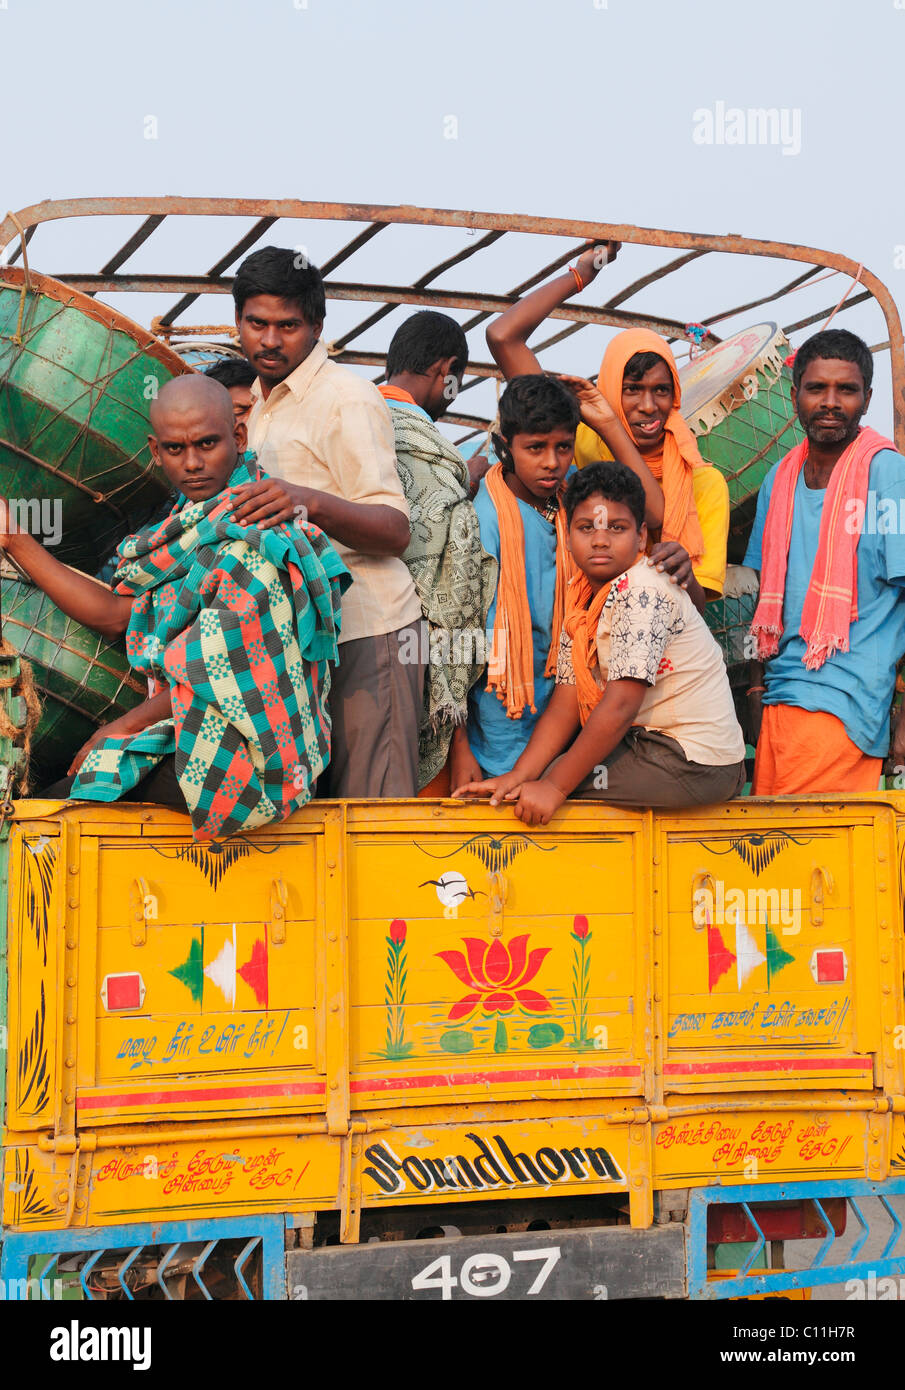 Hindu pilgrims with drums in a pickup truck on the way back from the Thaipusam Festival in Palani, , Tamilnadu, South India Stock Photo